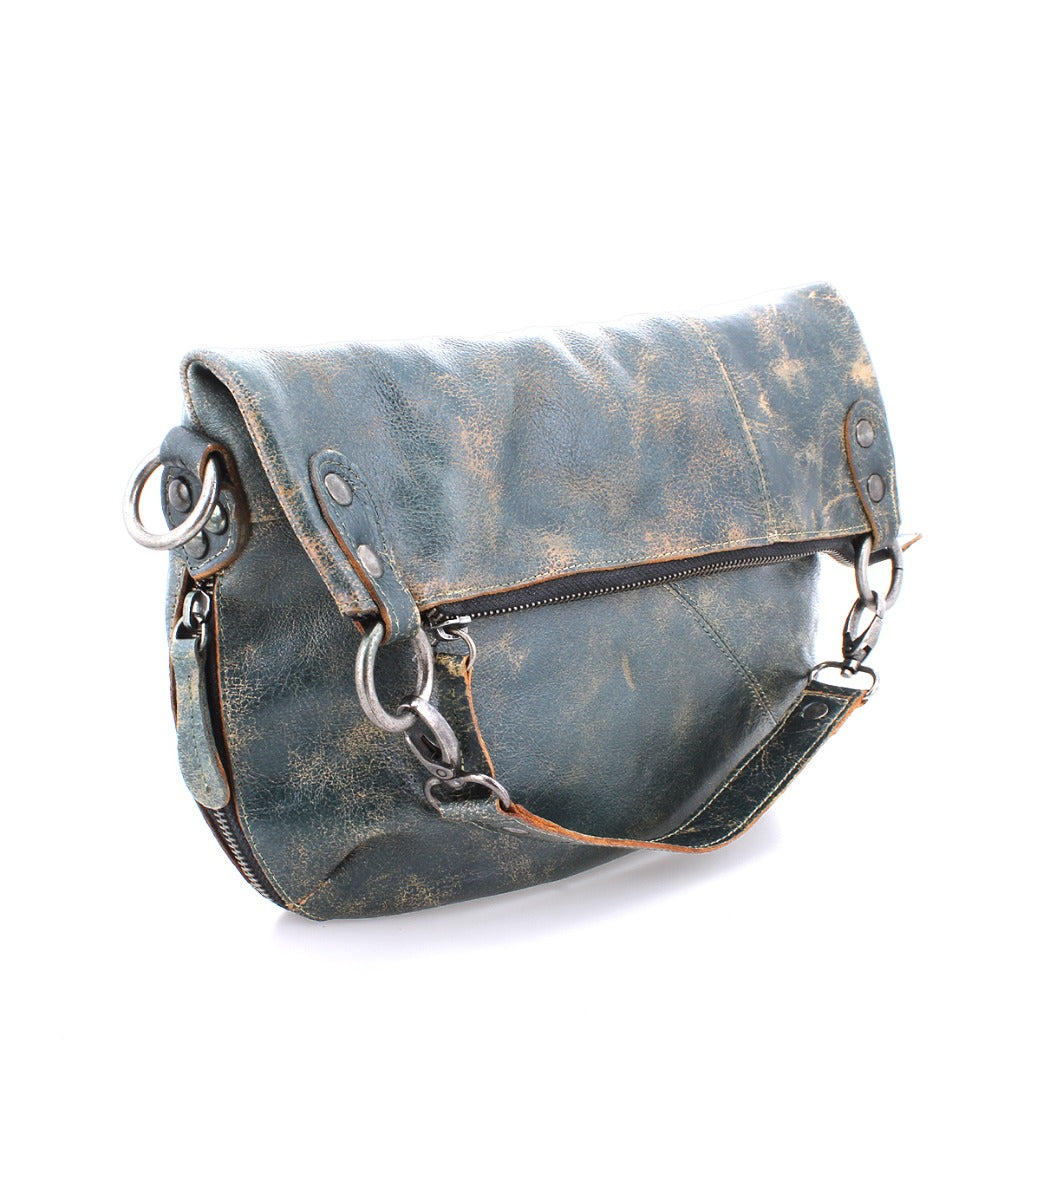 A blue leather Tahiti crossbody bag with metal straps by Bed Stu.